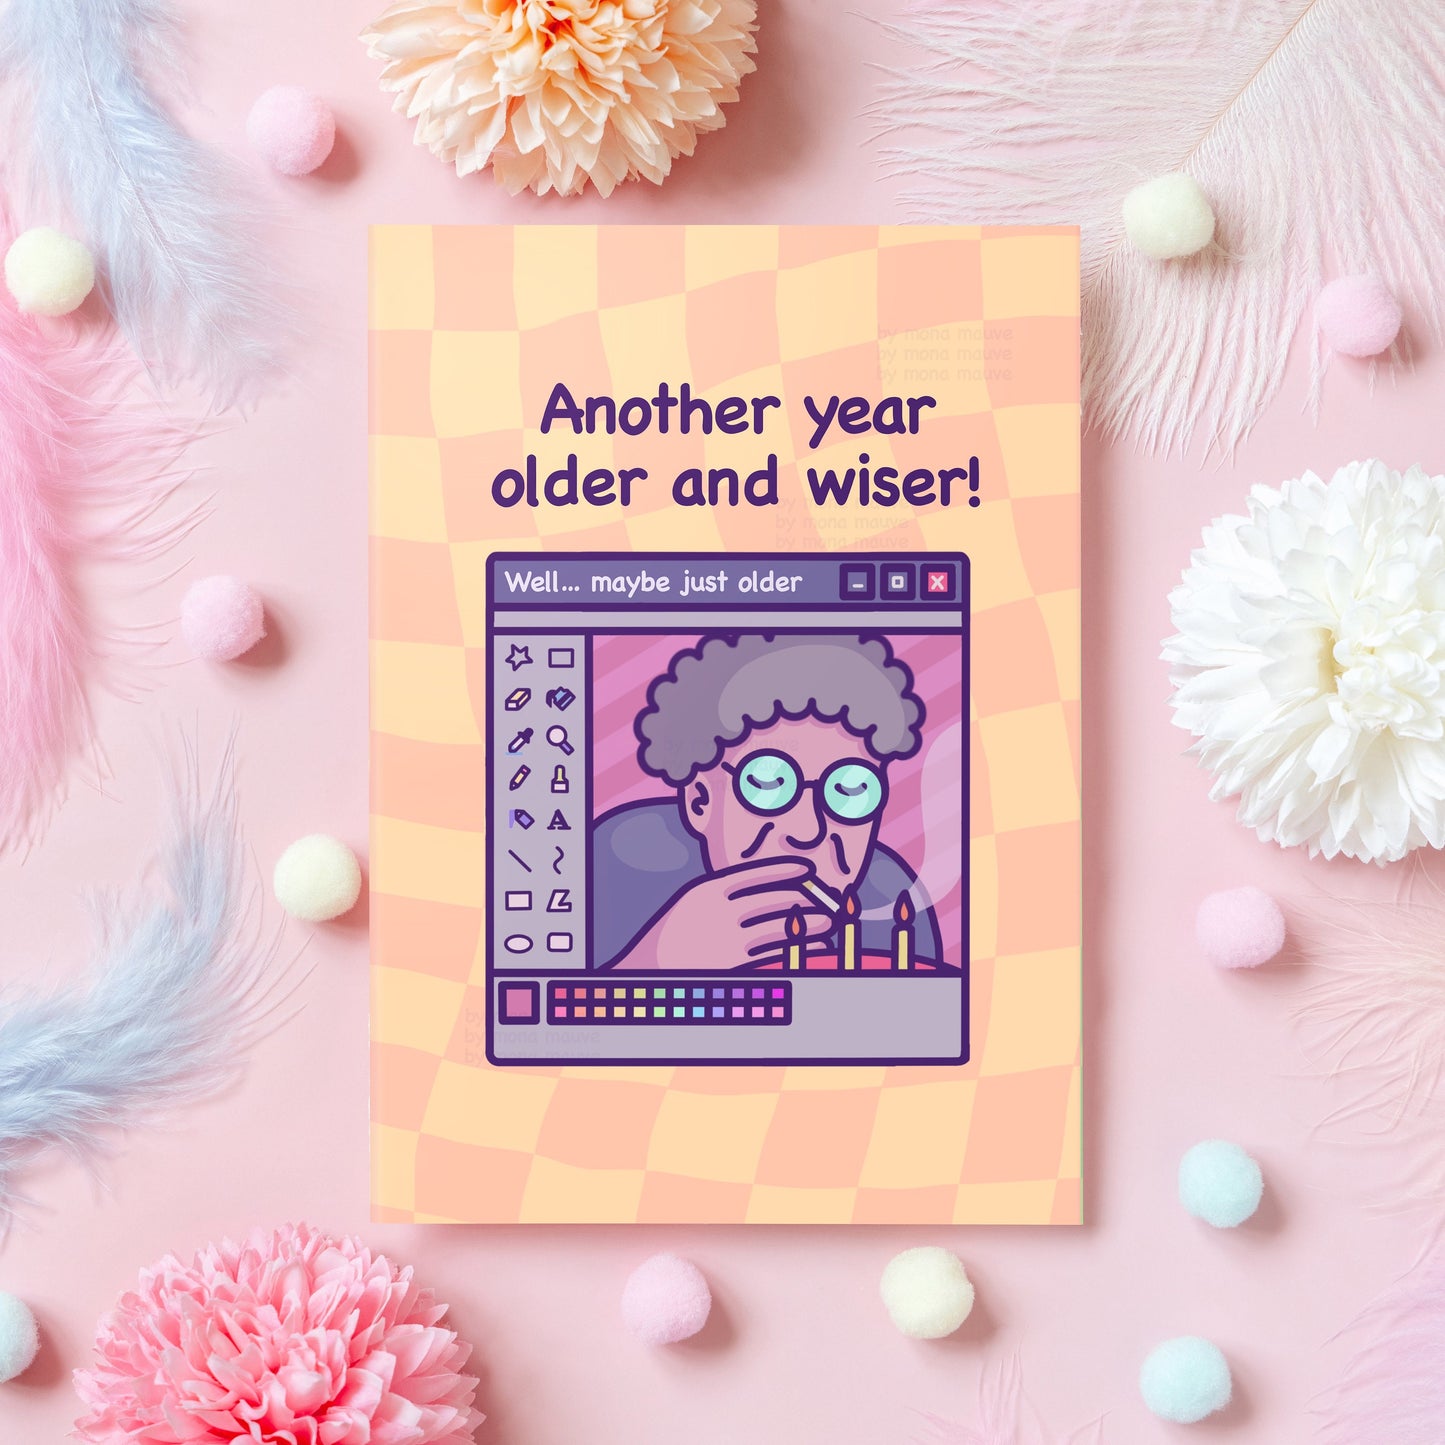 Funny Birthday Card | Older and Wiser! (Well, Maybe Just Older...) | Rude & Offensive Happy Birthday Card | Funny Gift for Her or Him